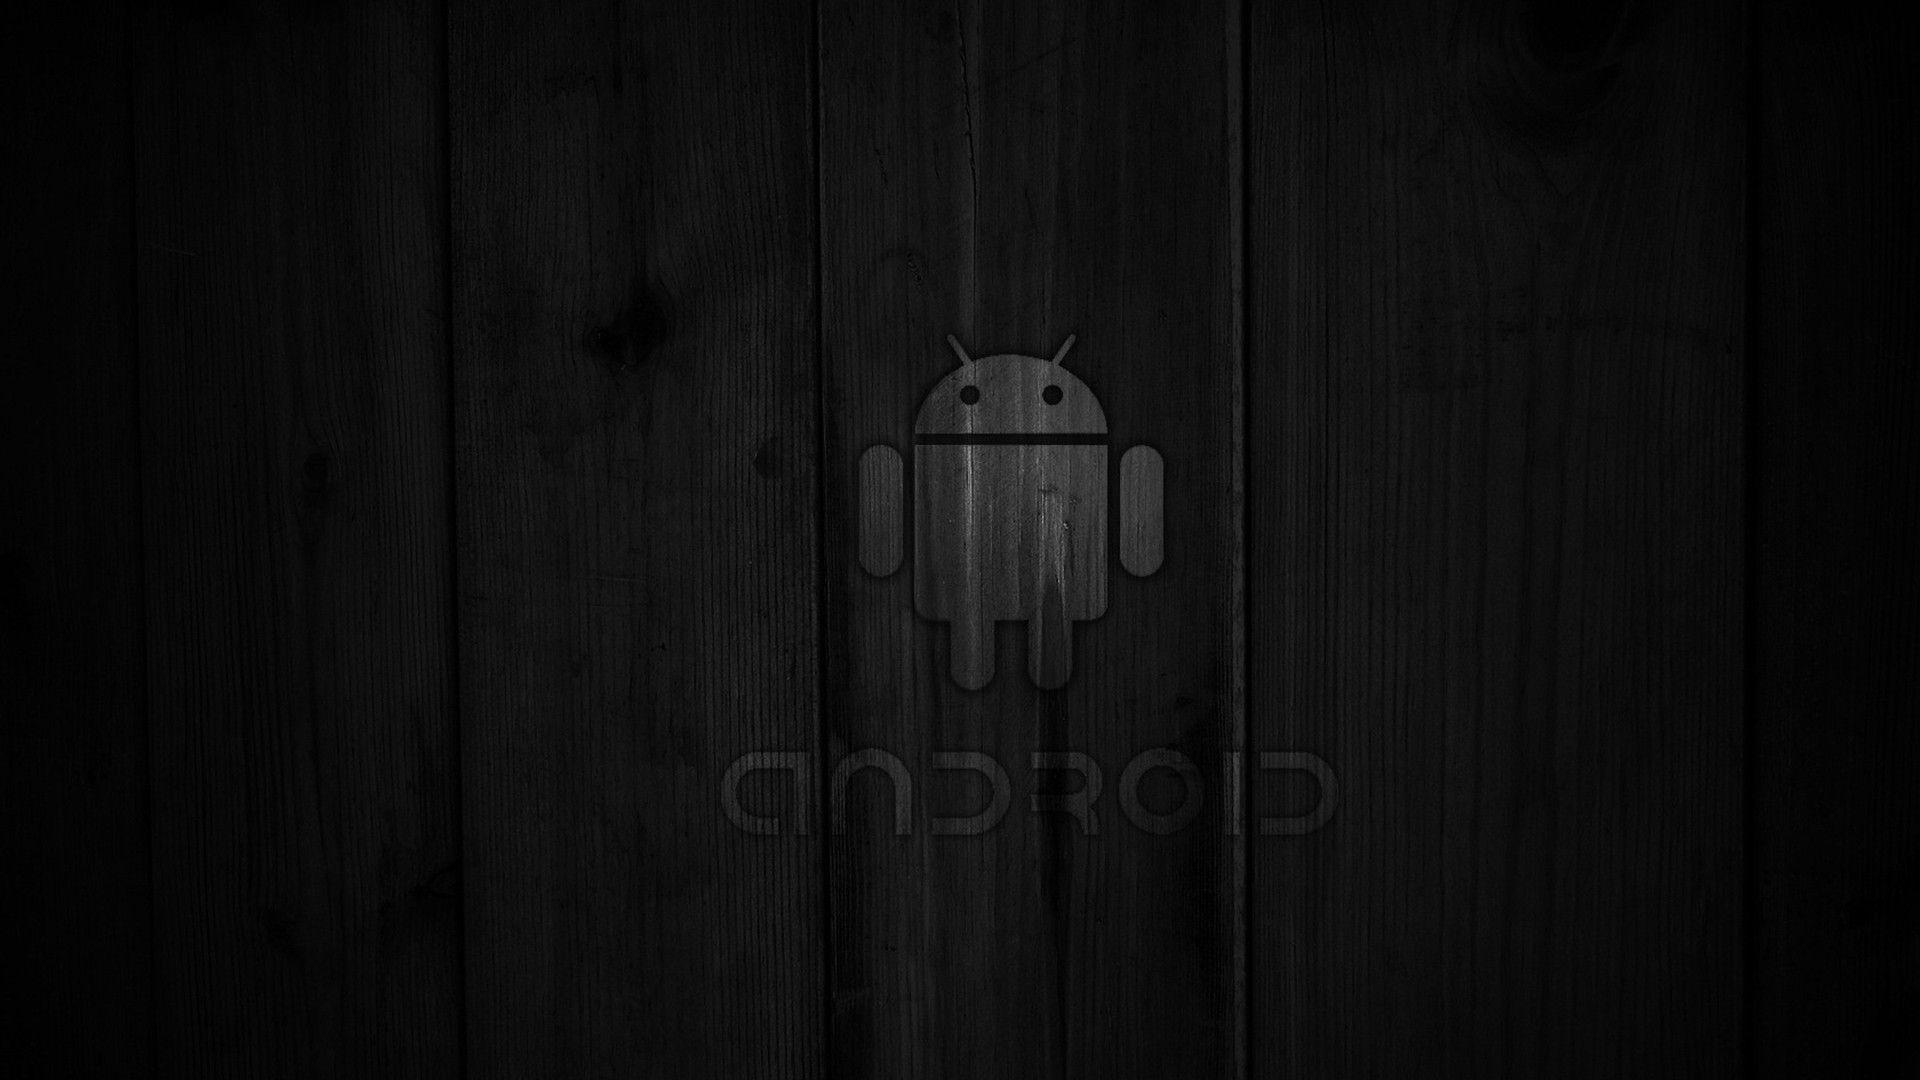 Android Logo Wallpapers